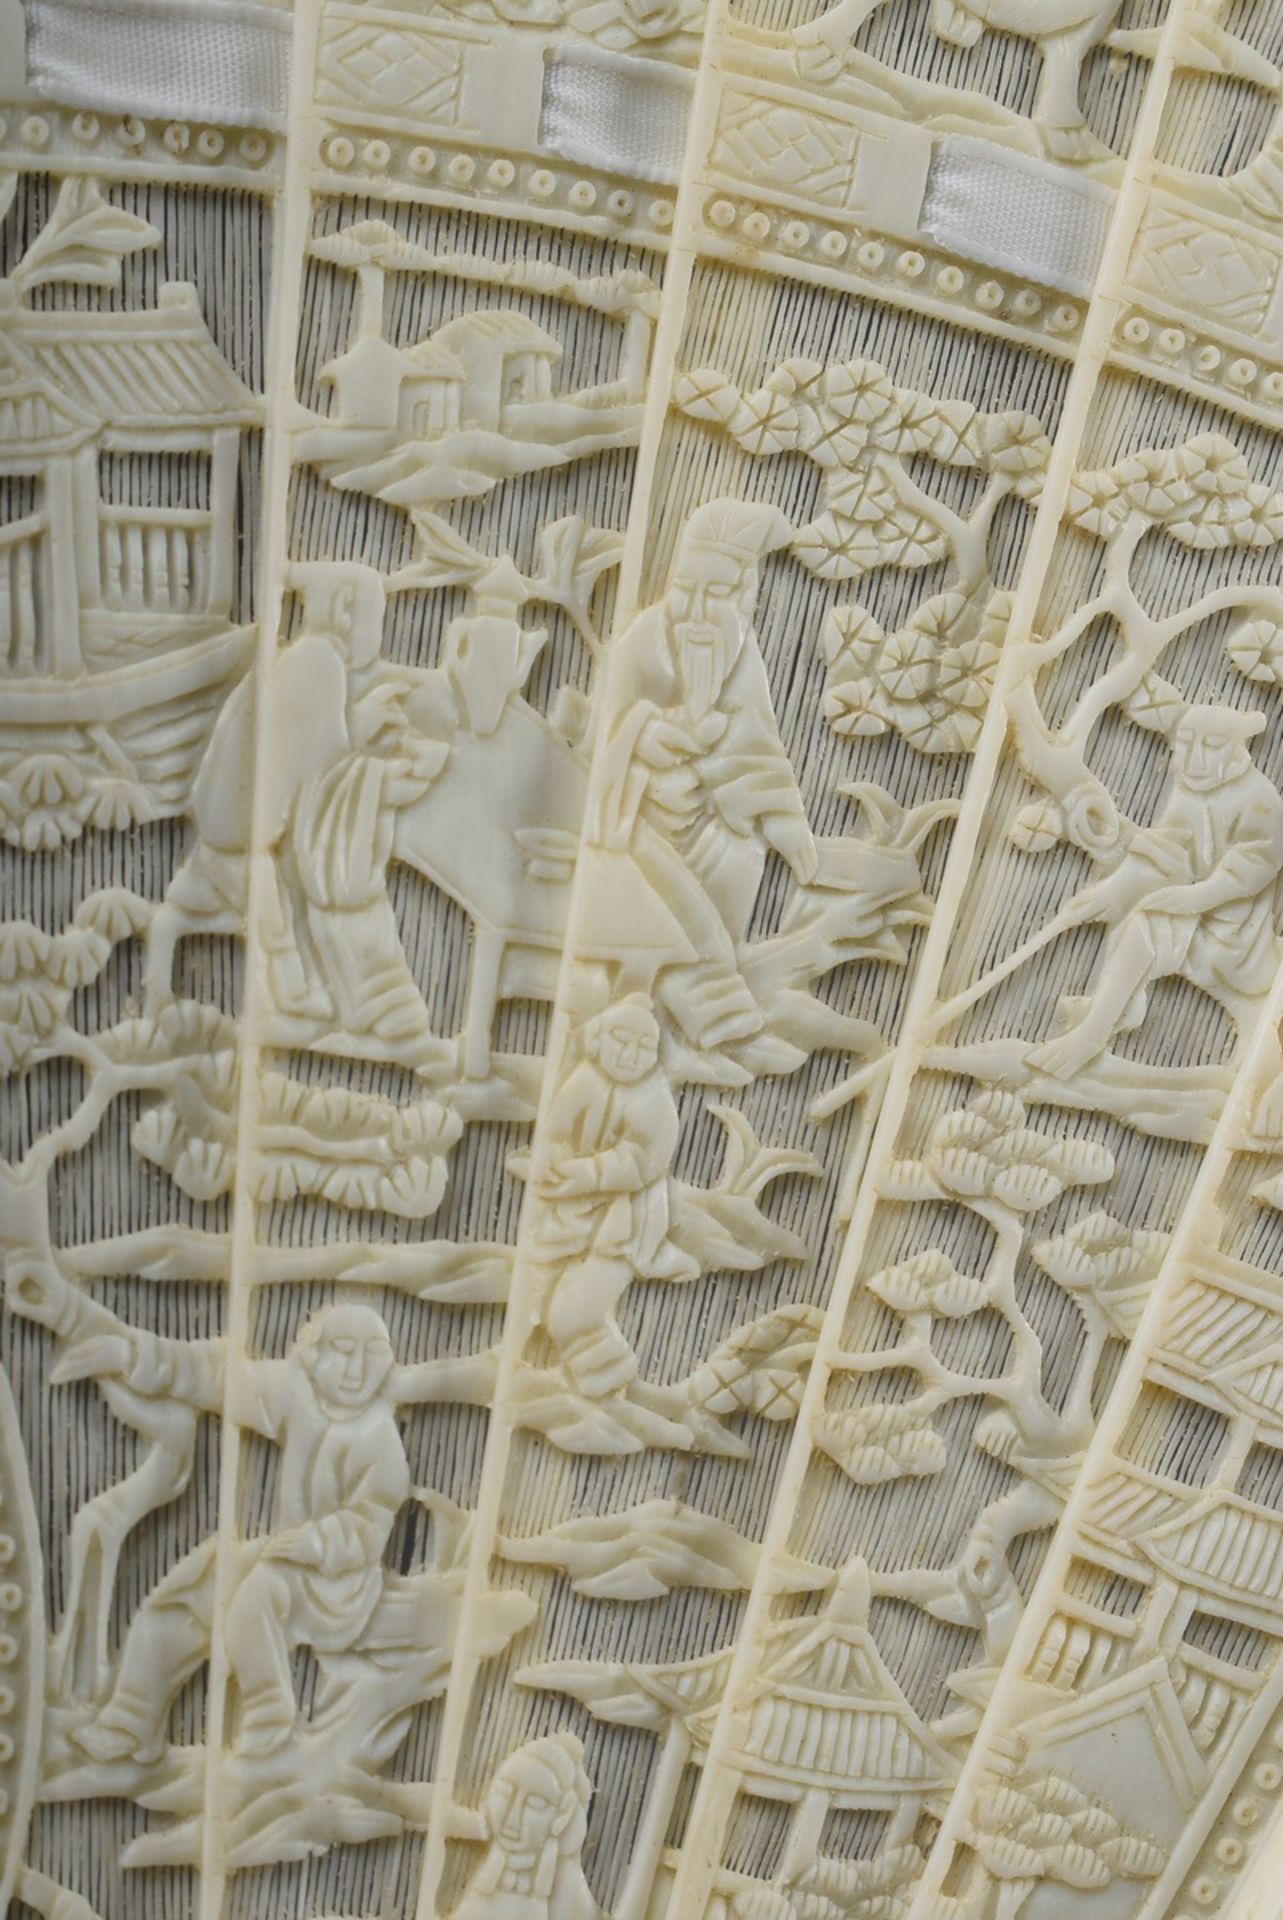 Ivory brisée fan with finest carvings "Chinese genre scenes" and central monogram "MB", Canton end  - Image 6 of 8